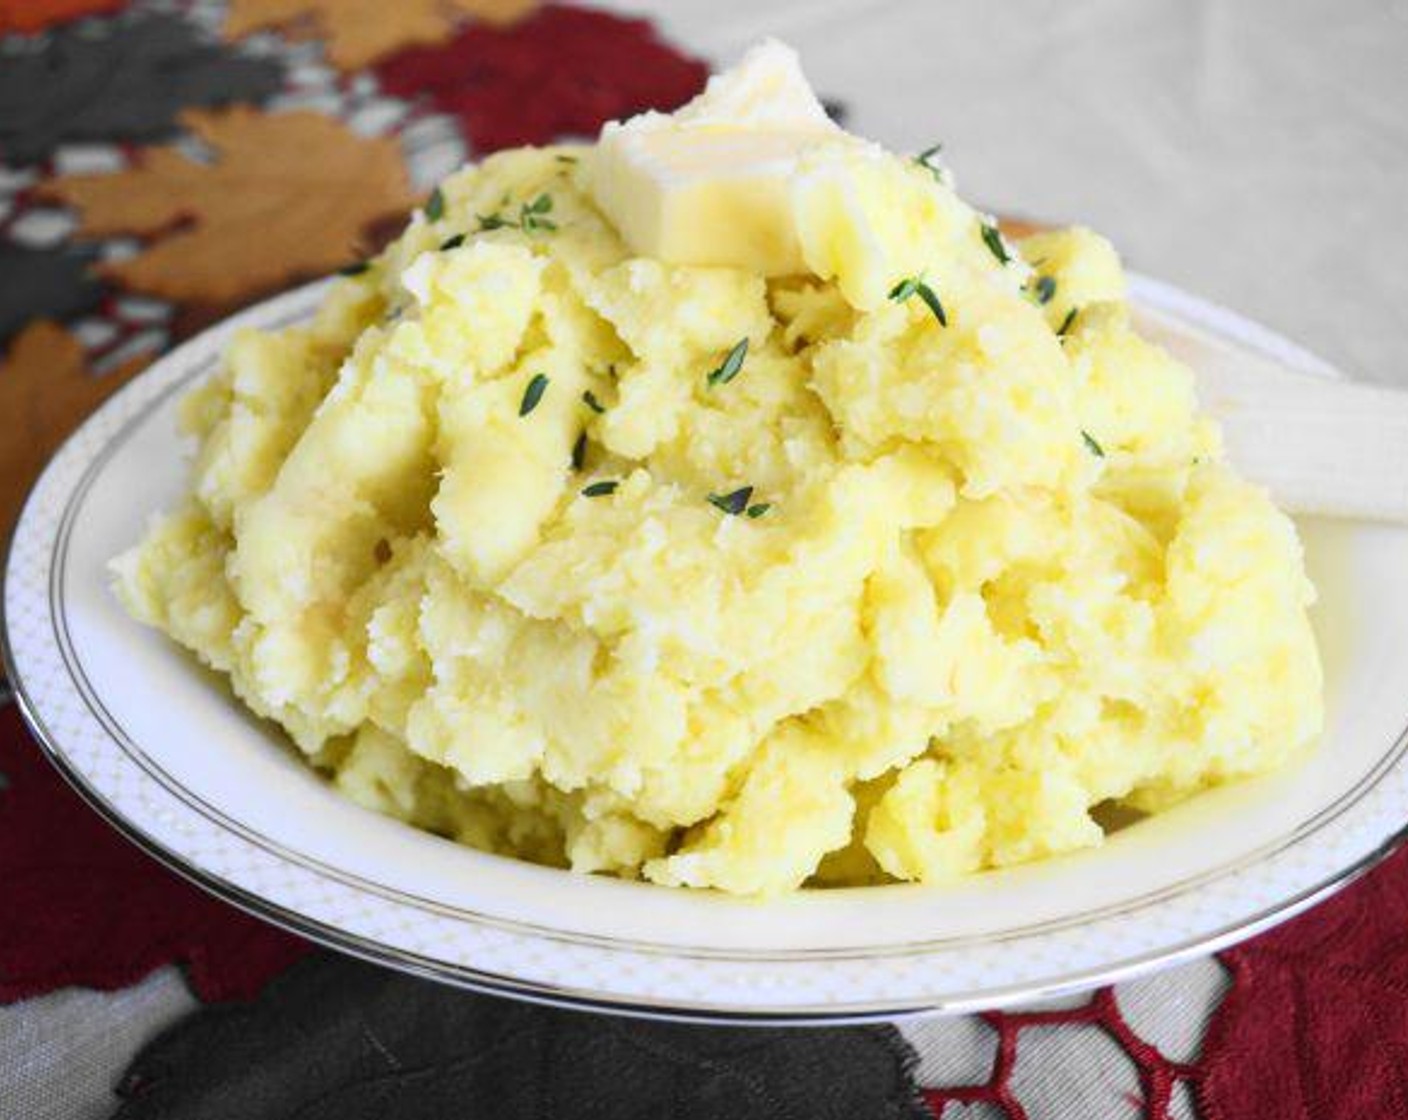 step 5 Scoop the mashed potatoes into a big serving bowl, then top it with a pat of butter and a big sprinkle of Fresh Herbs (1 pinch). Serve immediately and enjoy!